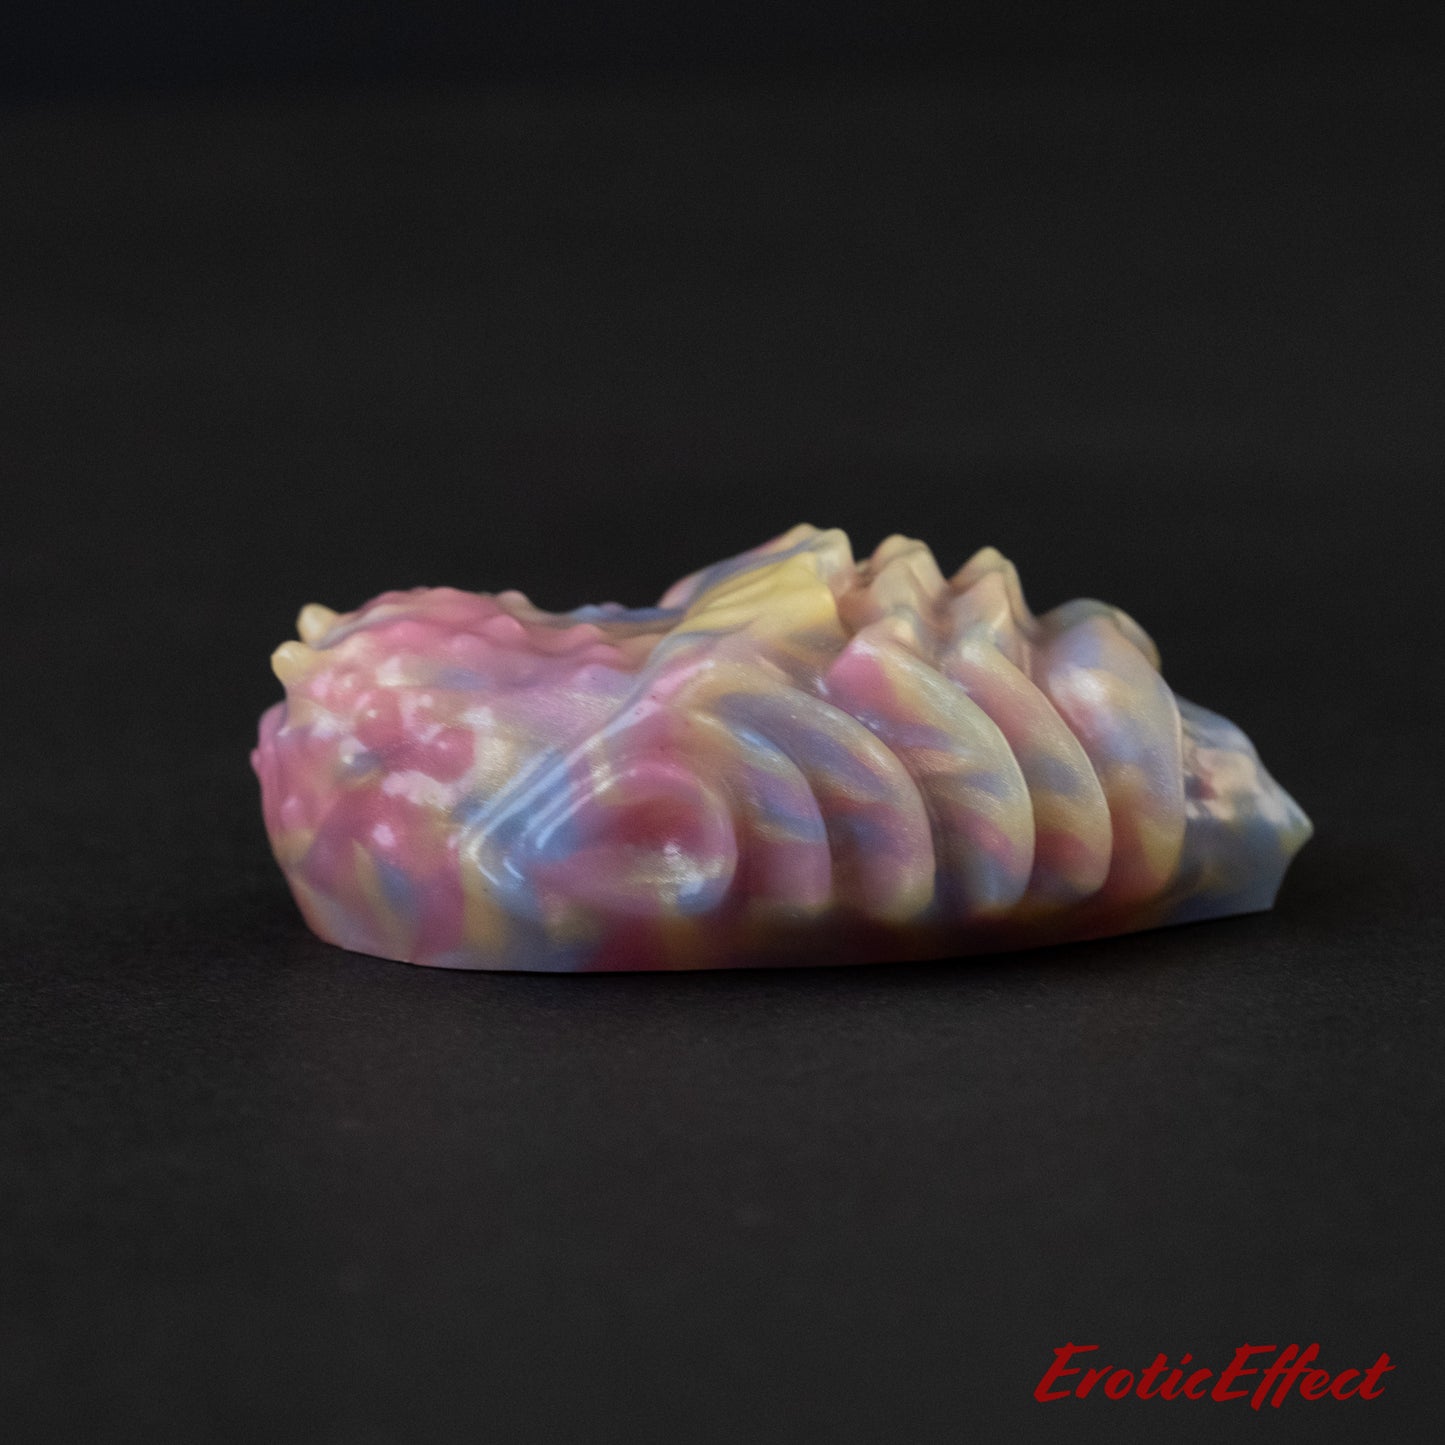 Edgar Silicone Grindable/Squishy - Pink/Yellow/Blue Shimmer - Medium Firmness